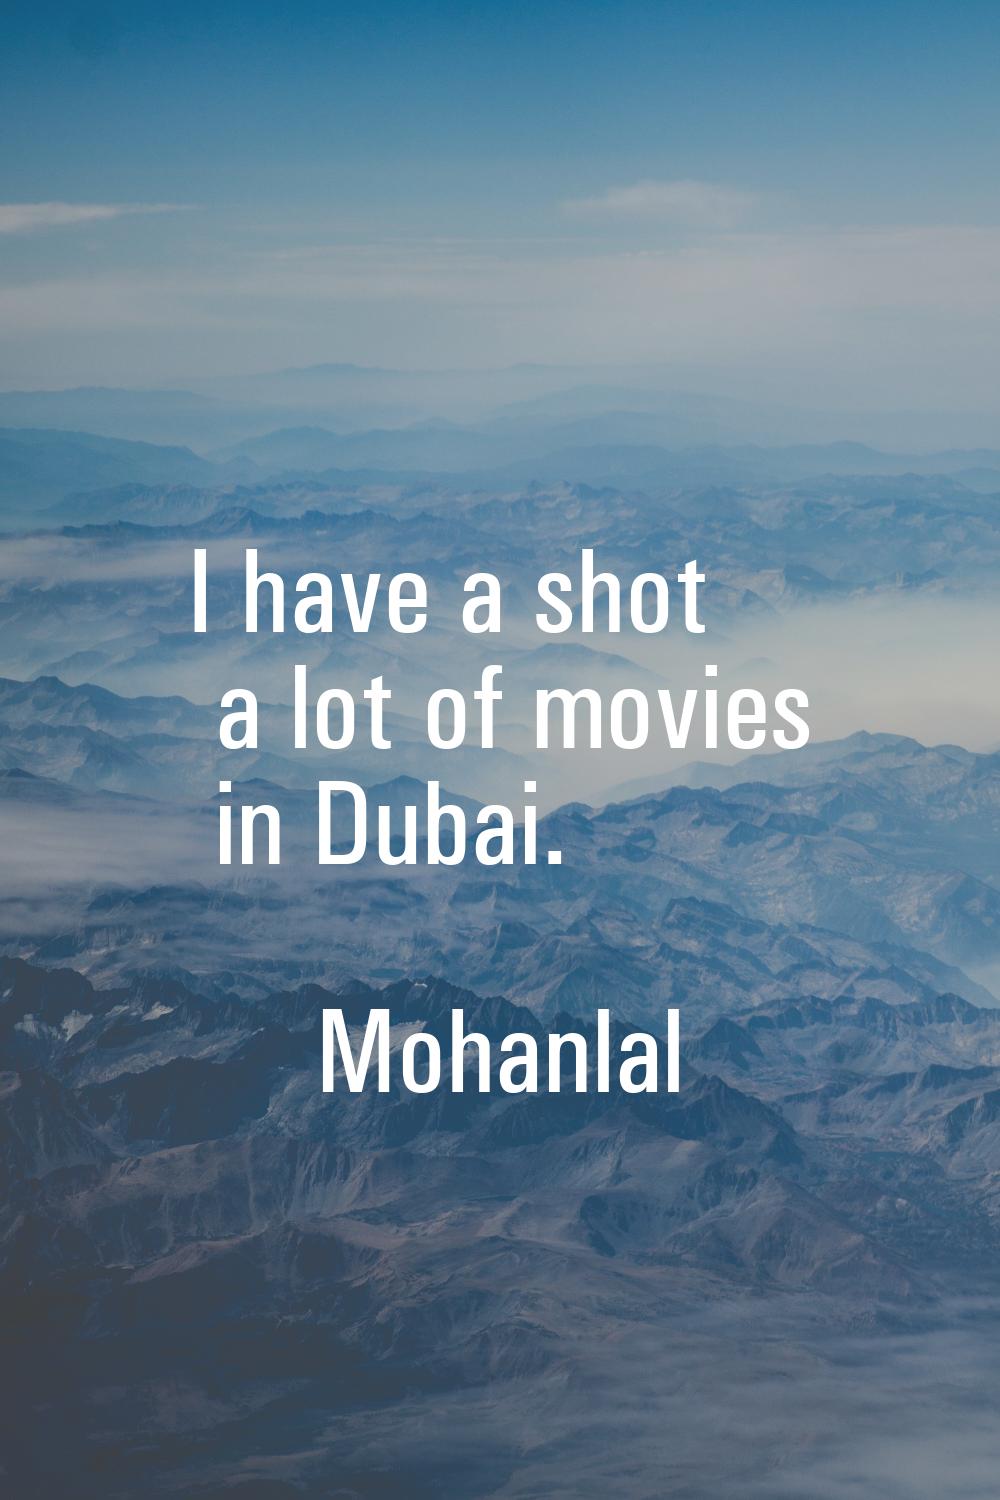 I have a shot a lot of movies in Dubai.